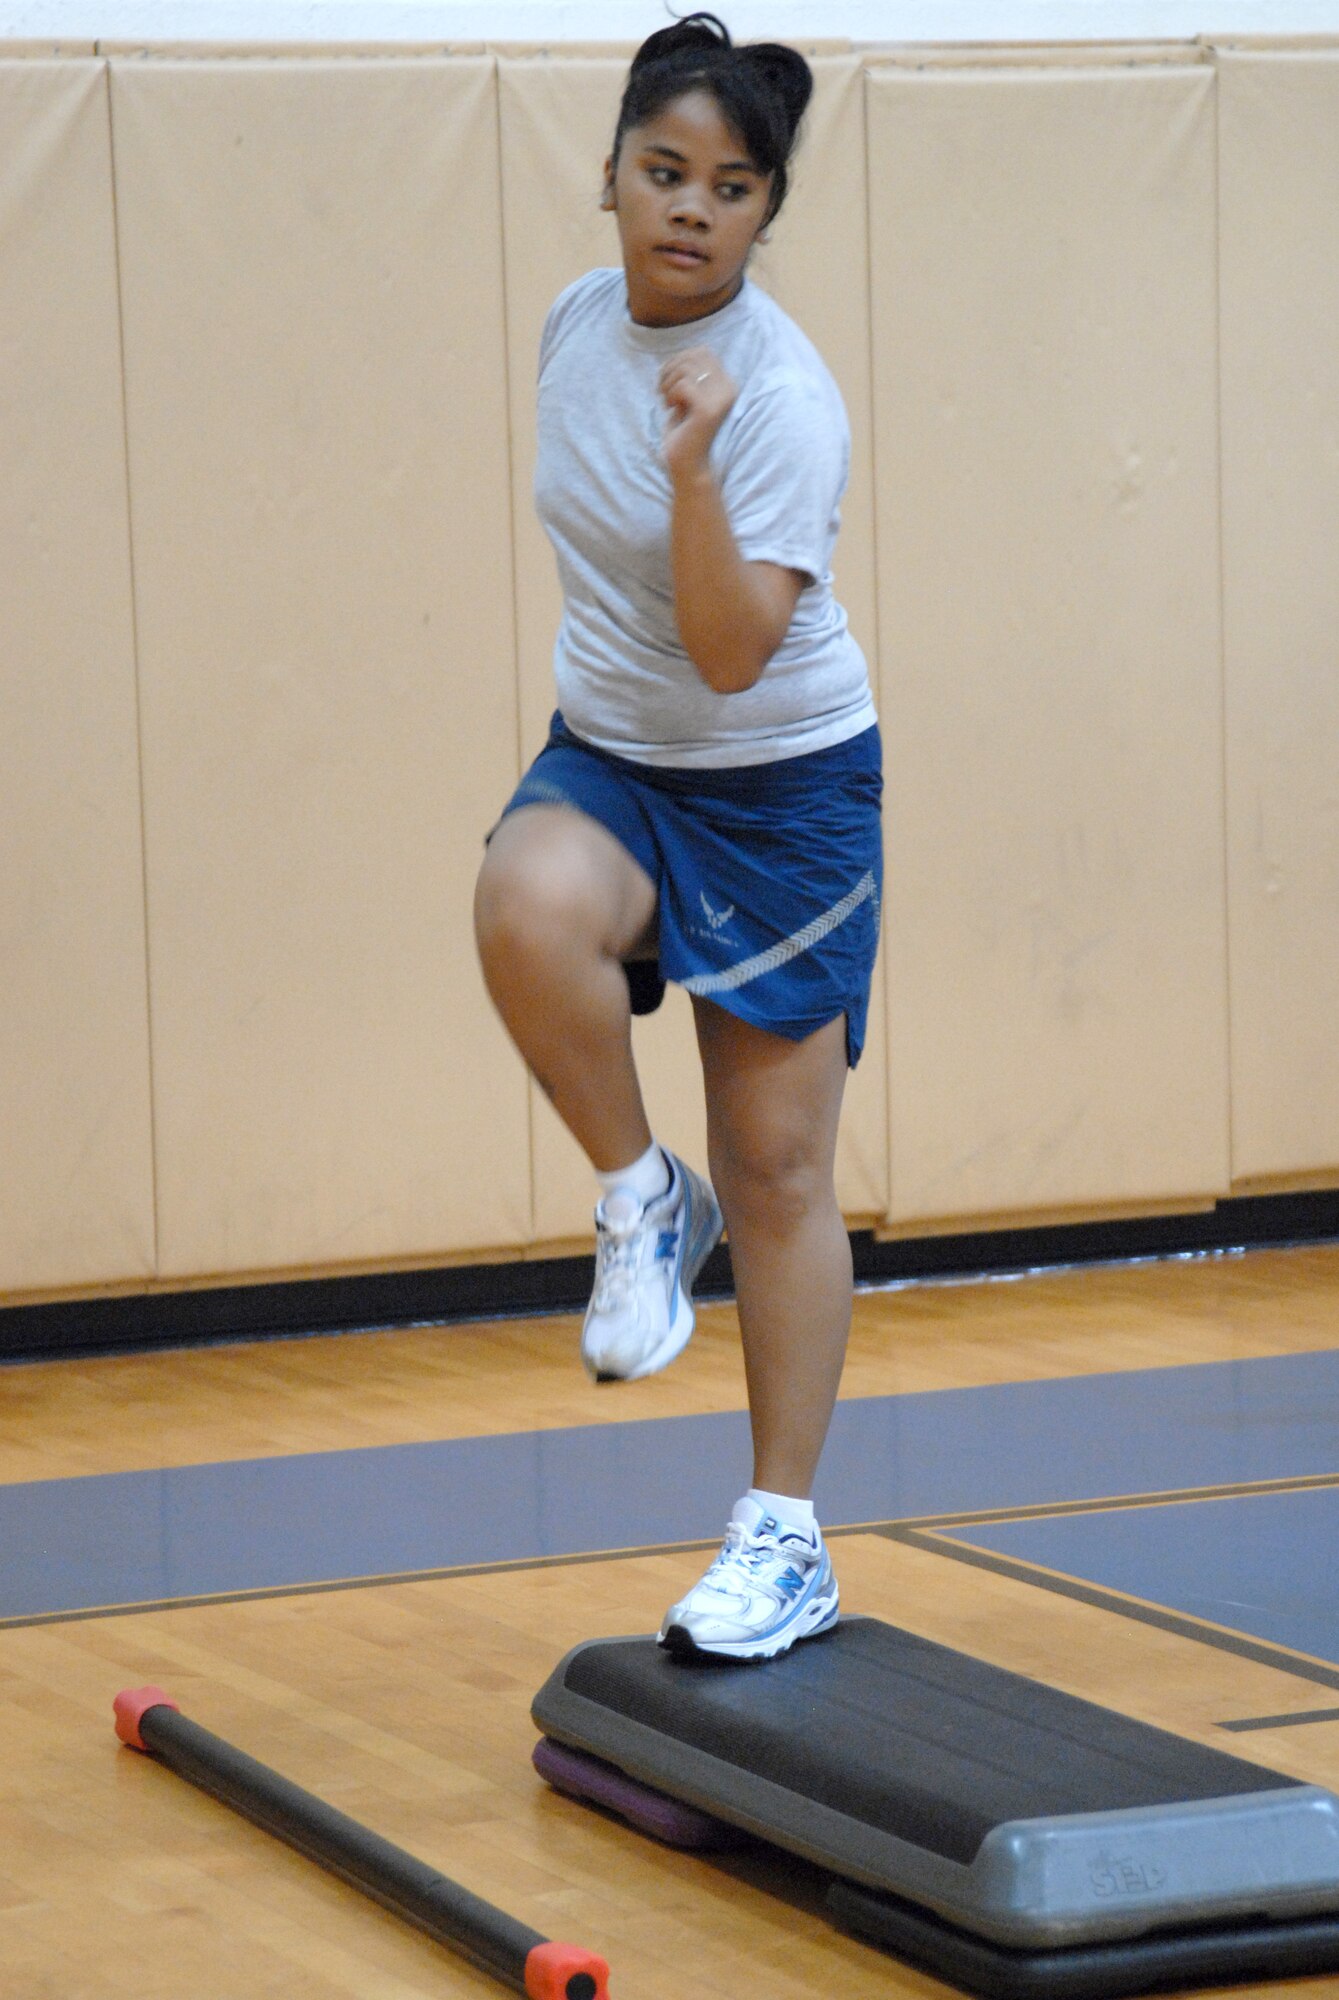 Senior Airman Fiatagata Ulukivaiola, 1st Special Operations Force Support Squadron, does high knee step aerobics during Post Pregnancy PT at the Commando Fitness Center, Hurlburt Field, Fla., July 21, 2010.  The class, sponsored by the Health and Wellness Center, is intended to help active-duty women recondition themselves and prevent injury by training members how to increase and maintain their fitness level properly after maternity leave. (U. S. Air Force photo by Staff Sgt. Orly N. Tyrell/Released)